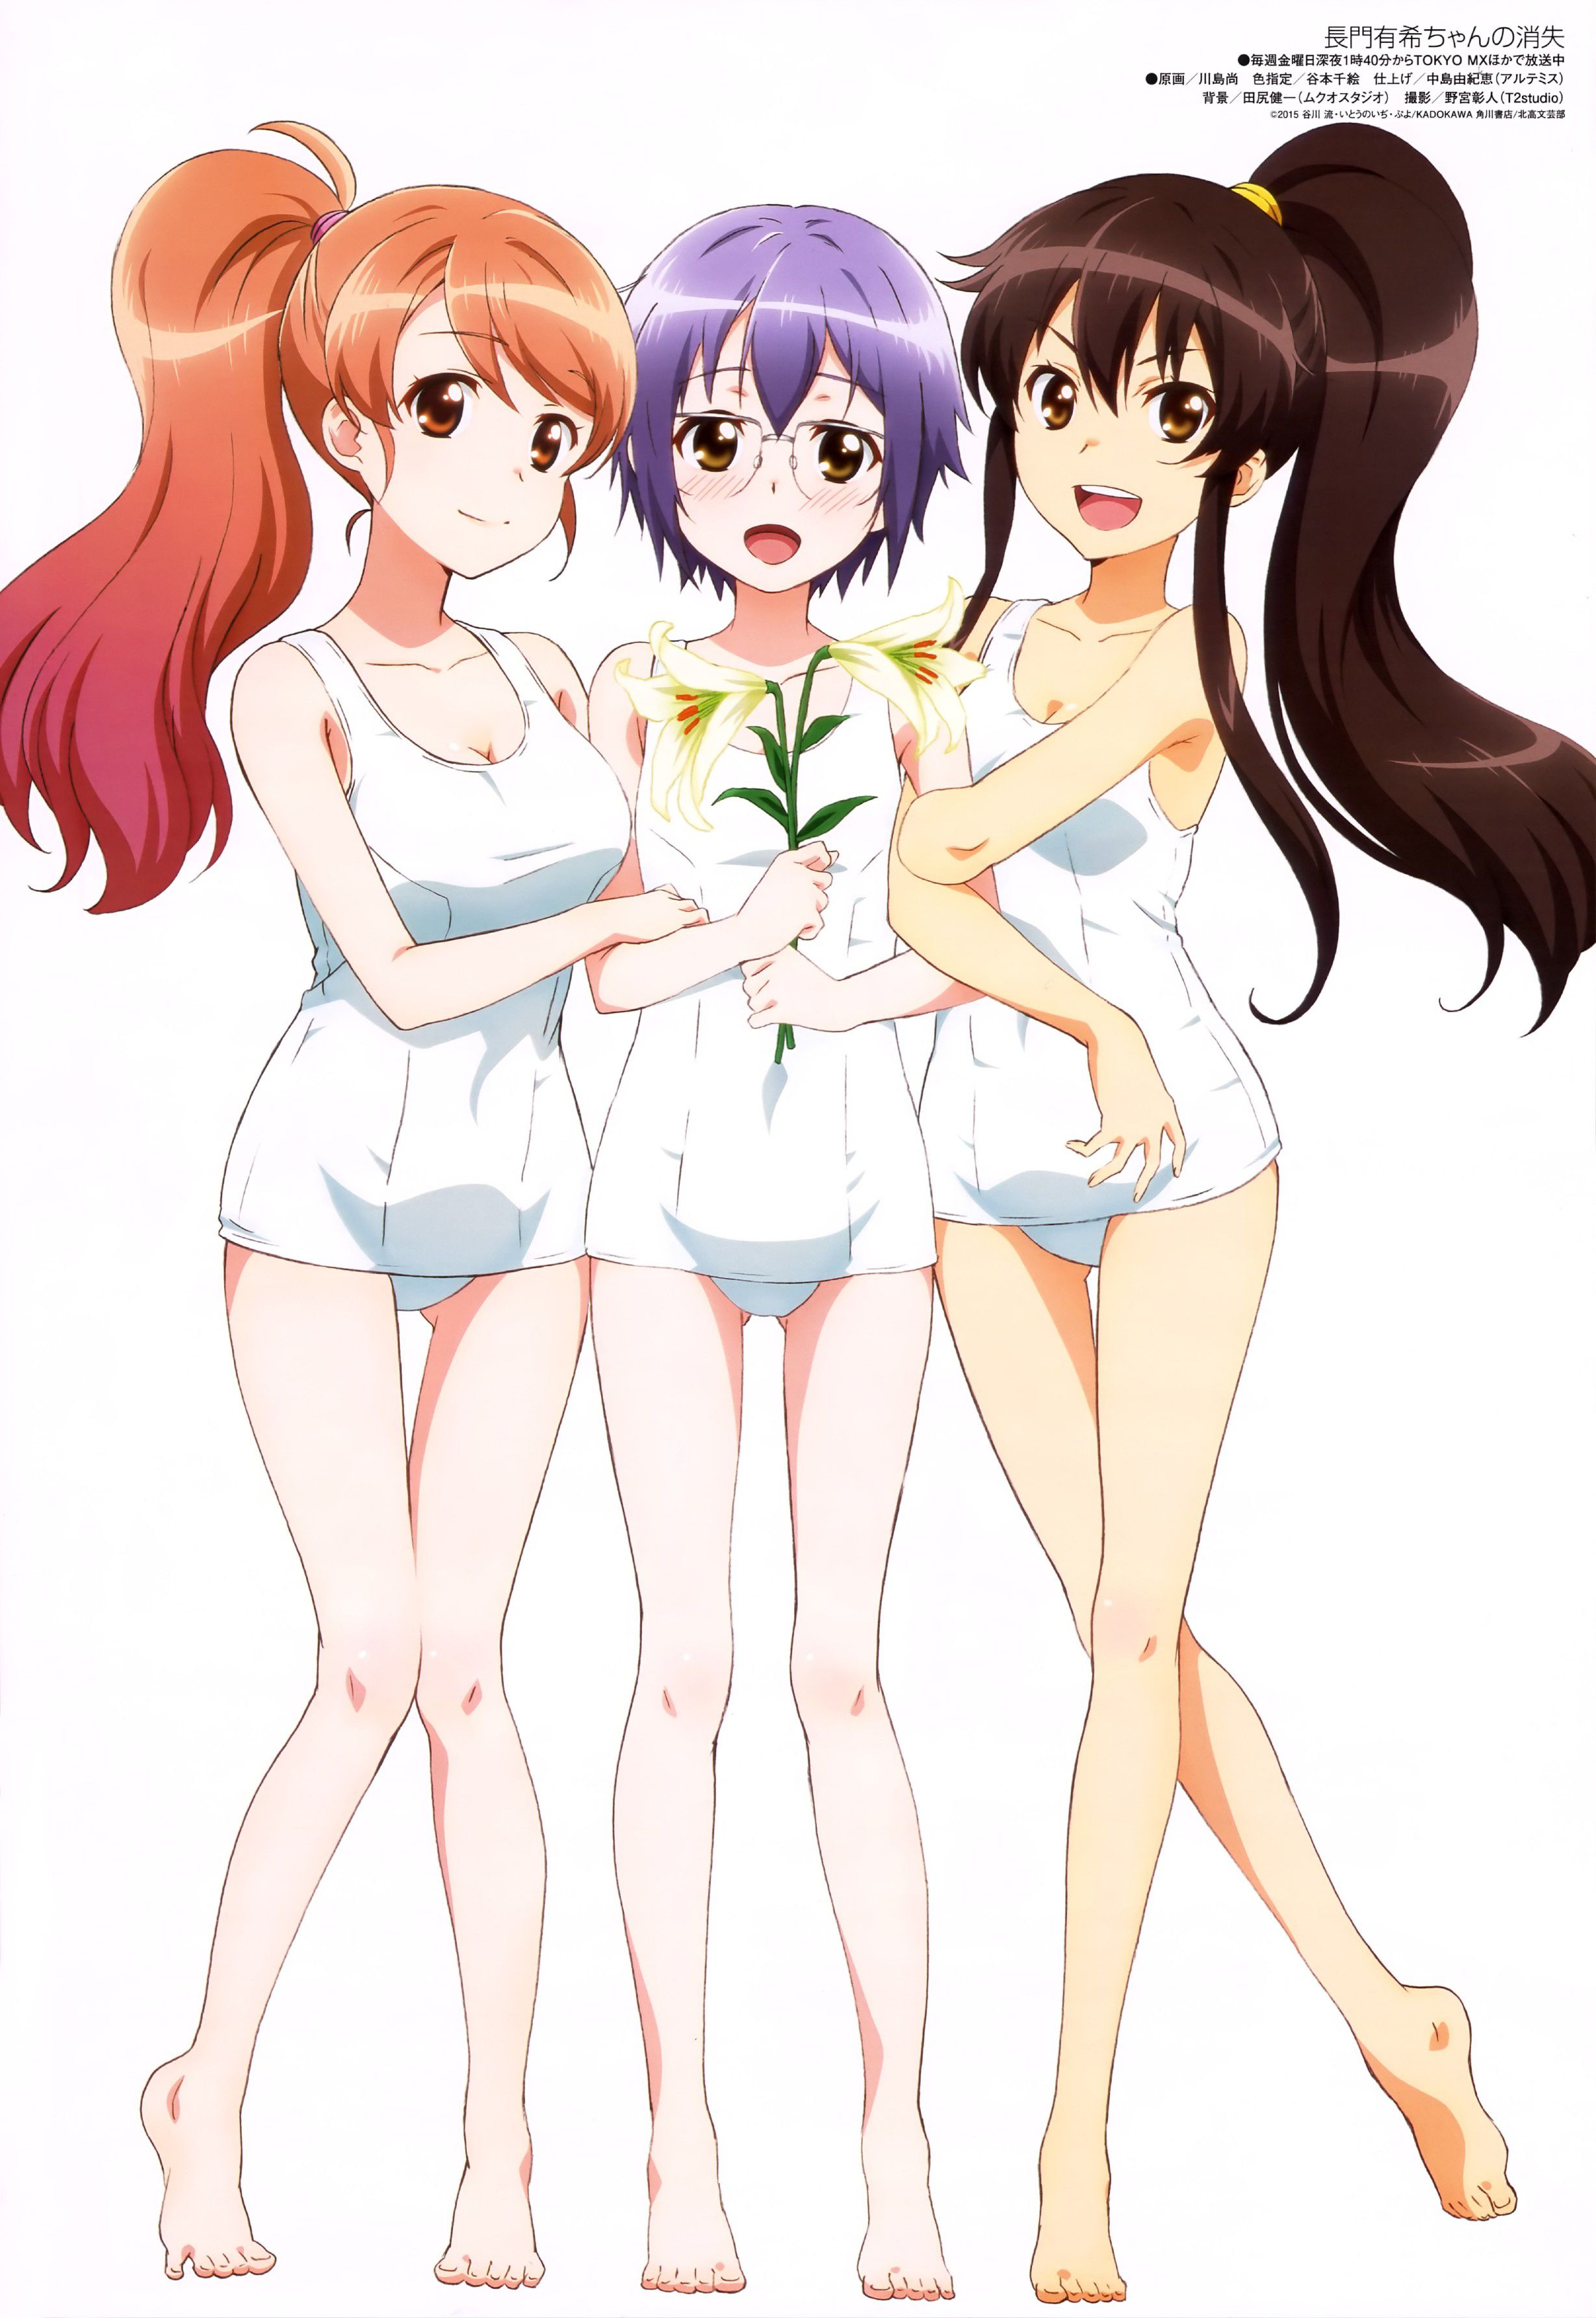 The secondary image of the swimsuit is too embarrassed. 4